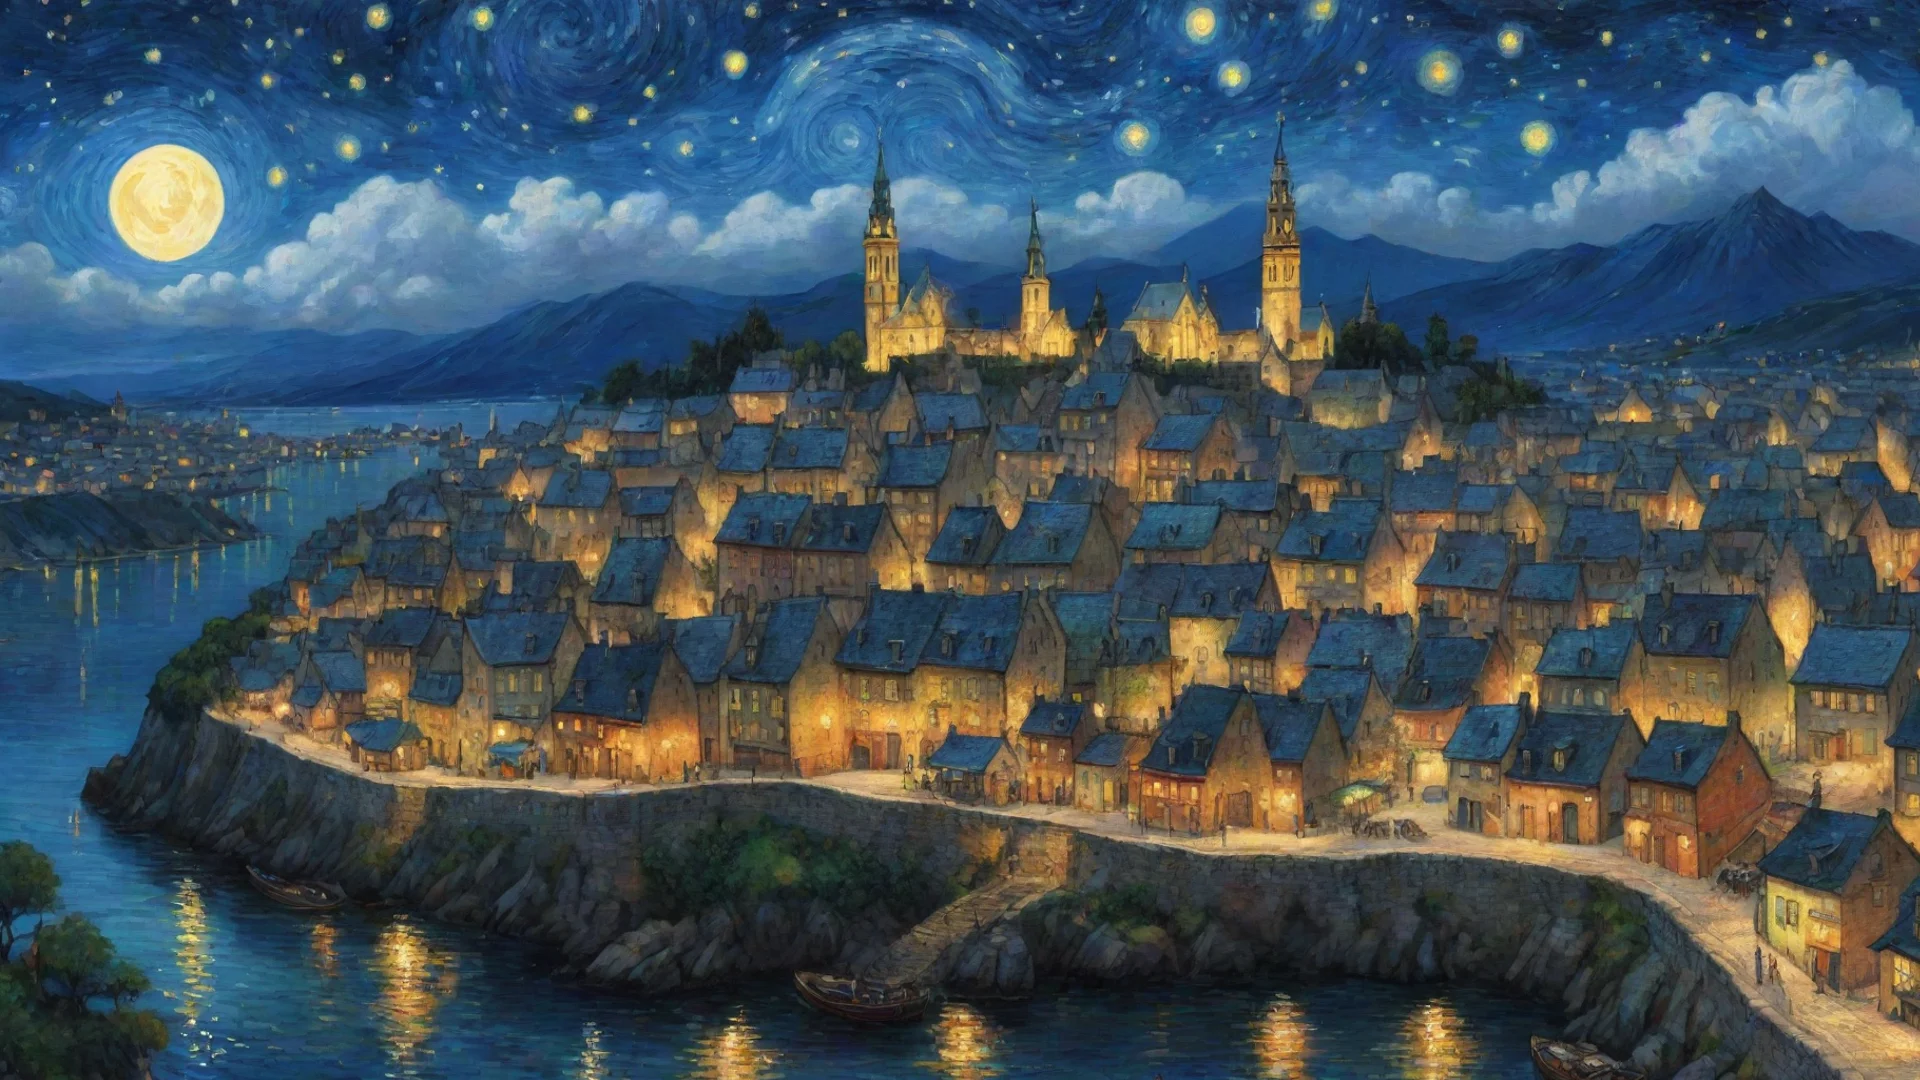 aiamazing town lit up at night sky epic lovely artistic ghibli van gogh happyness bliss peace  detailed asthetic hd wow awesome portrait 2 wide